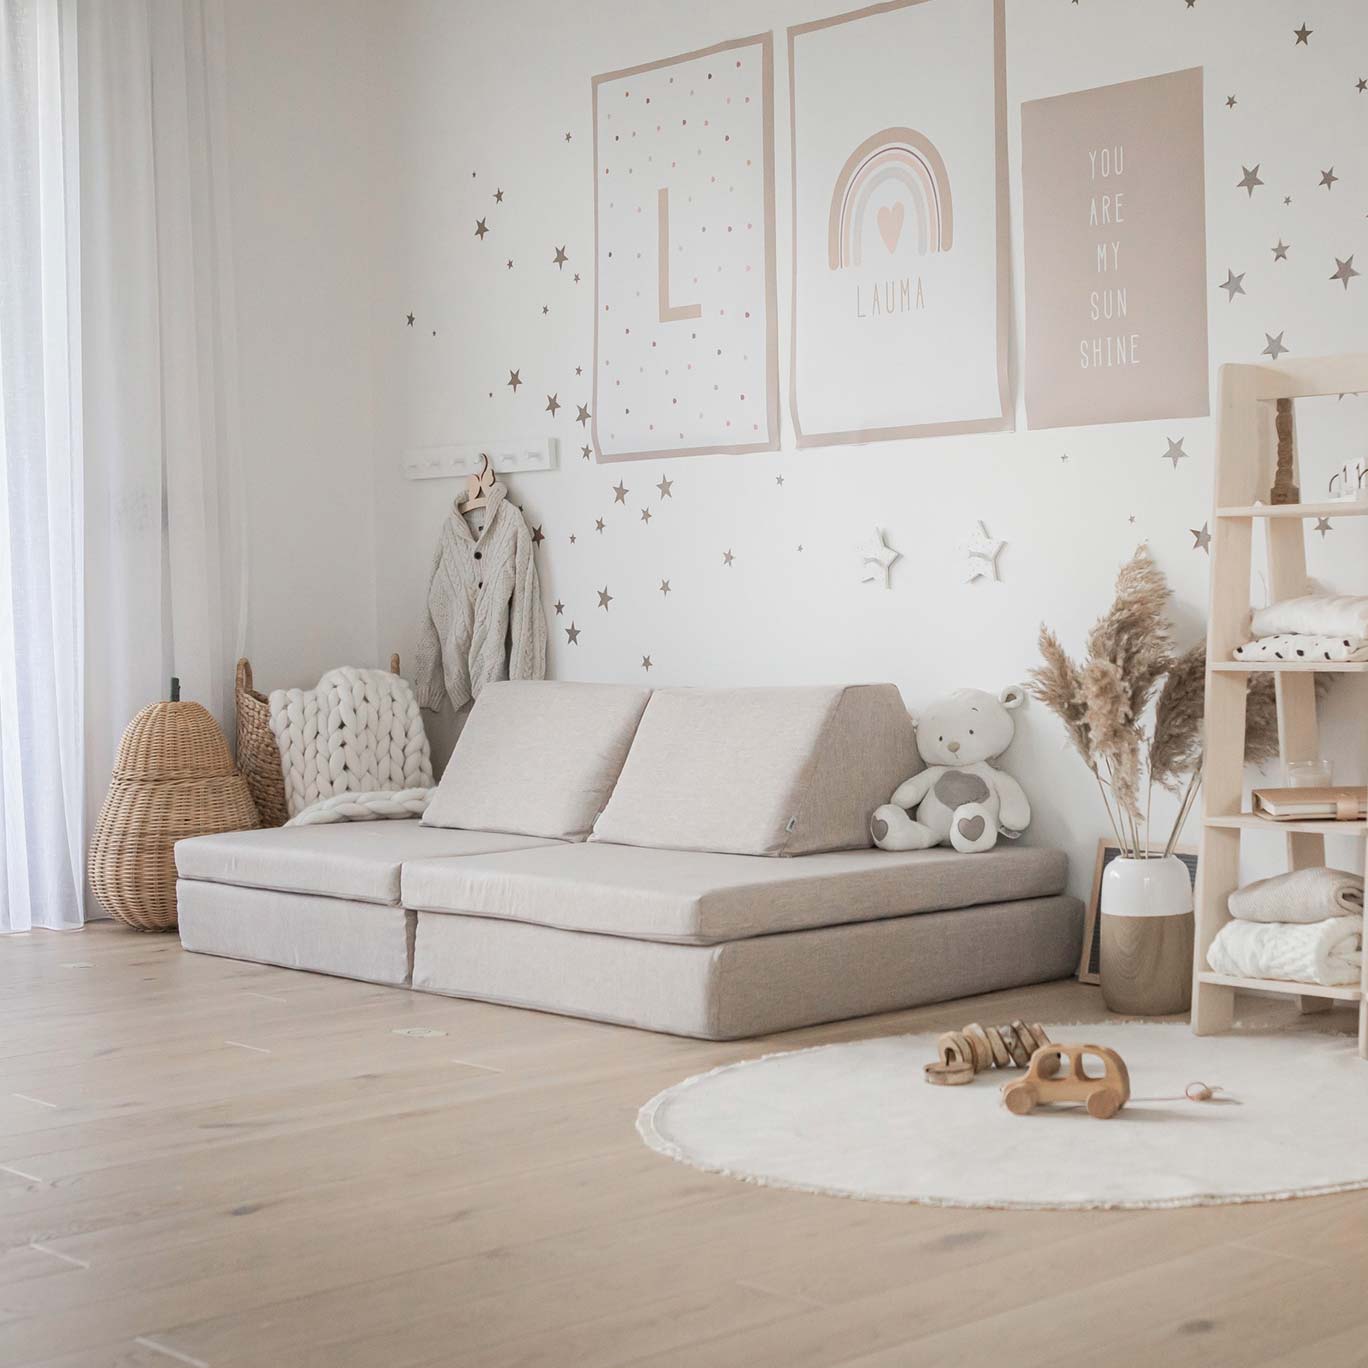 A child's room with a white couch and a wooden floor.